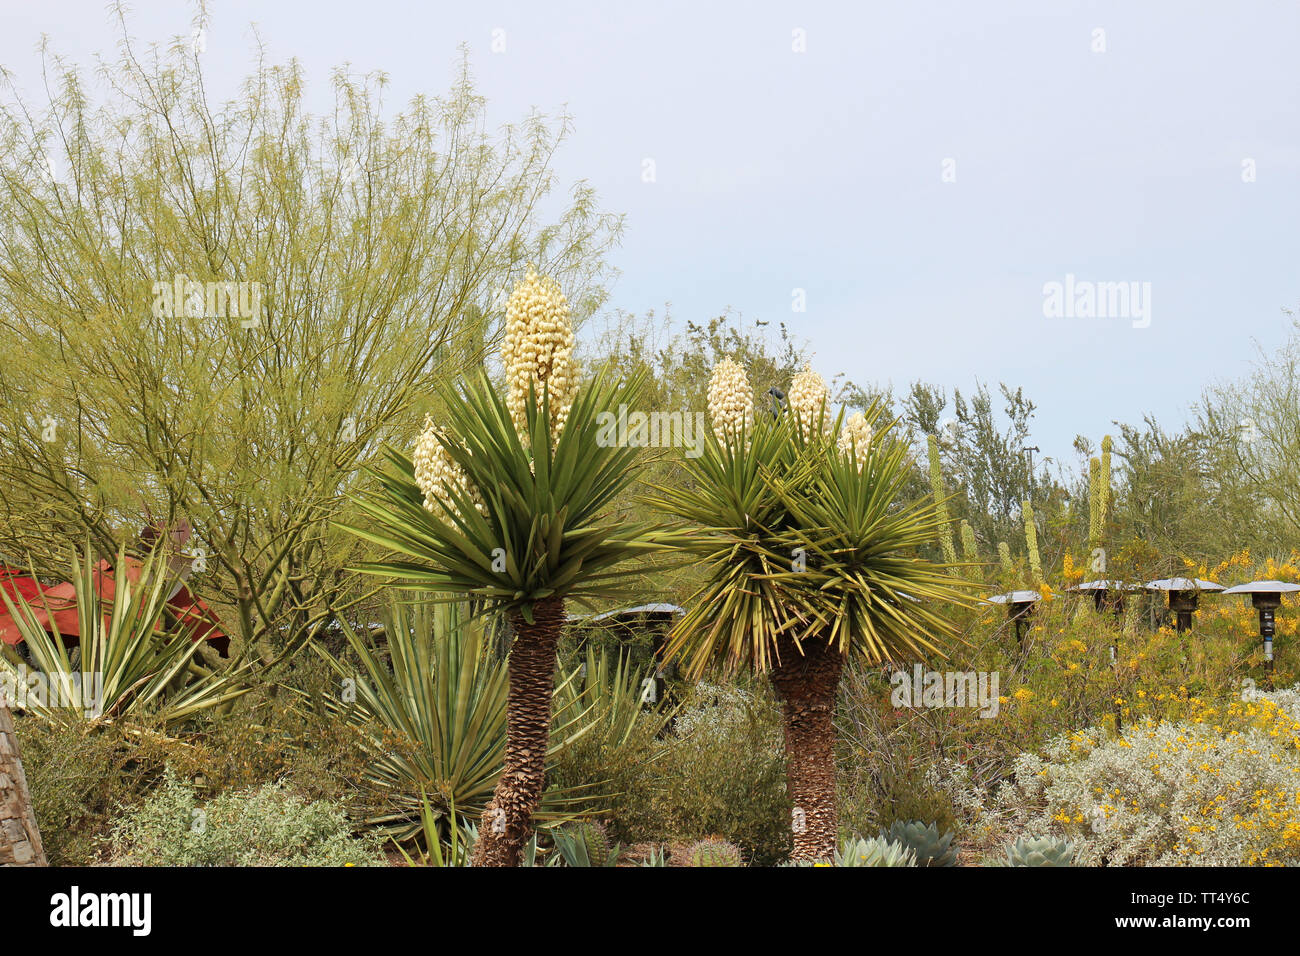 A desert landscape featuring profusely flowering Mojave Yucca plants, aloe, Desert Marigolds, and a Palo Verde Tree in Arizona, USA Stock Photo